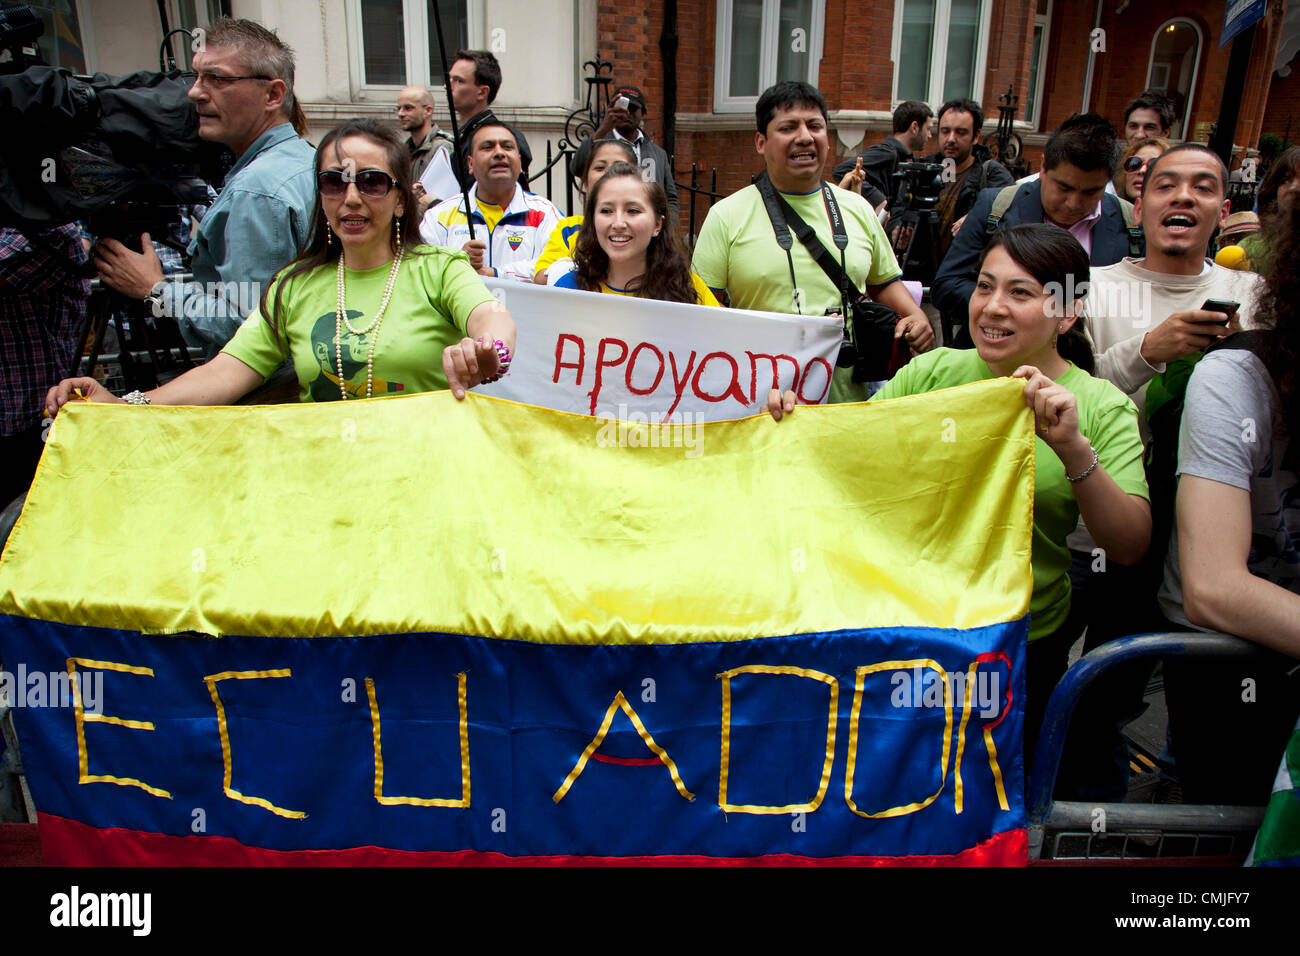 London, UK. Thursday 16th August 2012. Supporters of Julian Assange shout in protest with their flag outside the Ecuador Embassy. Stock Photo